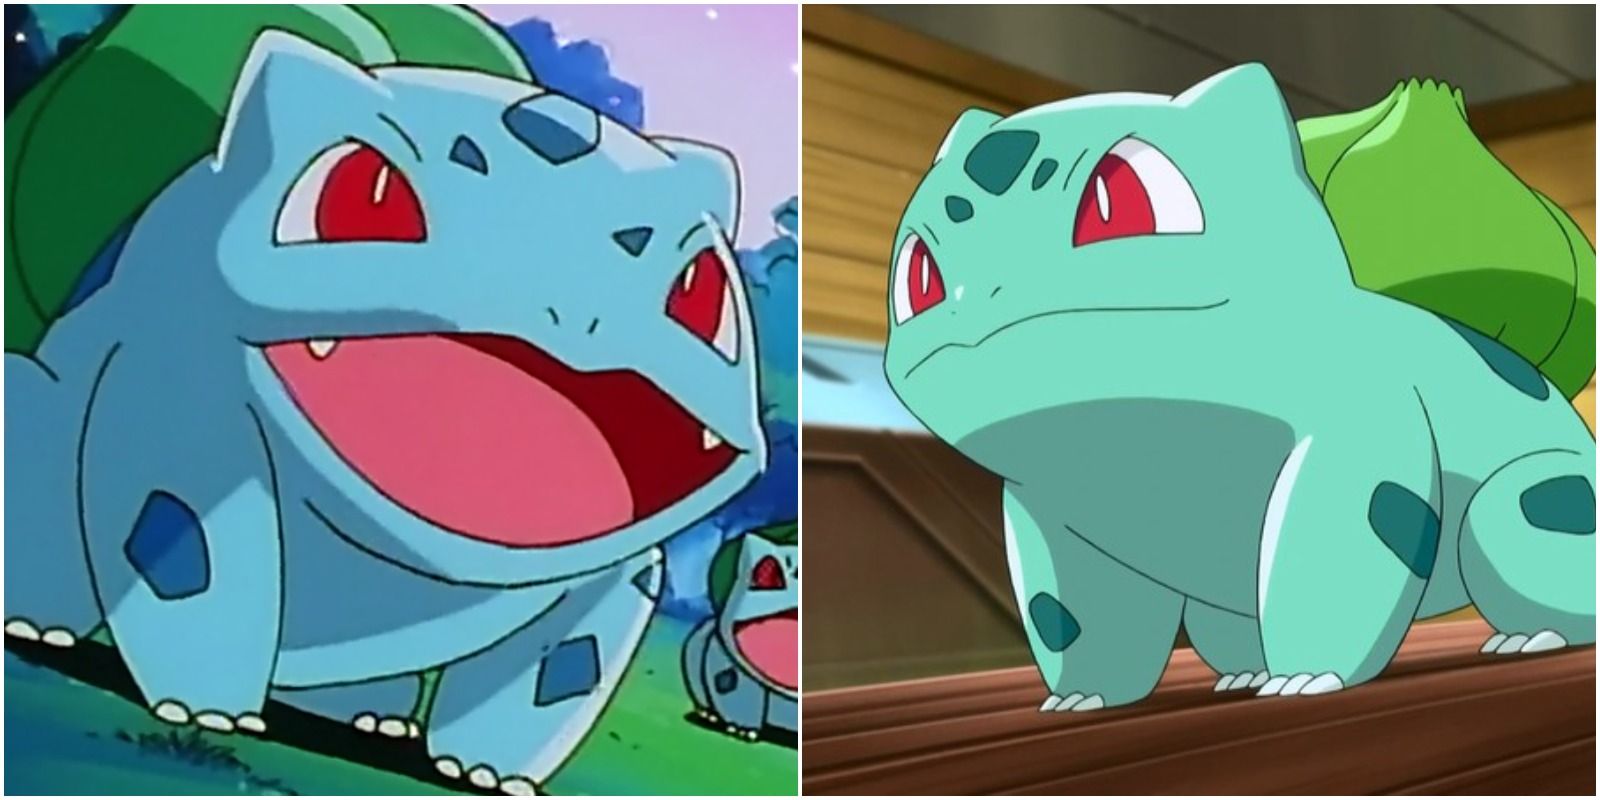 2 different bulbasaurs from the anime.